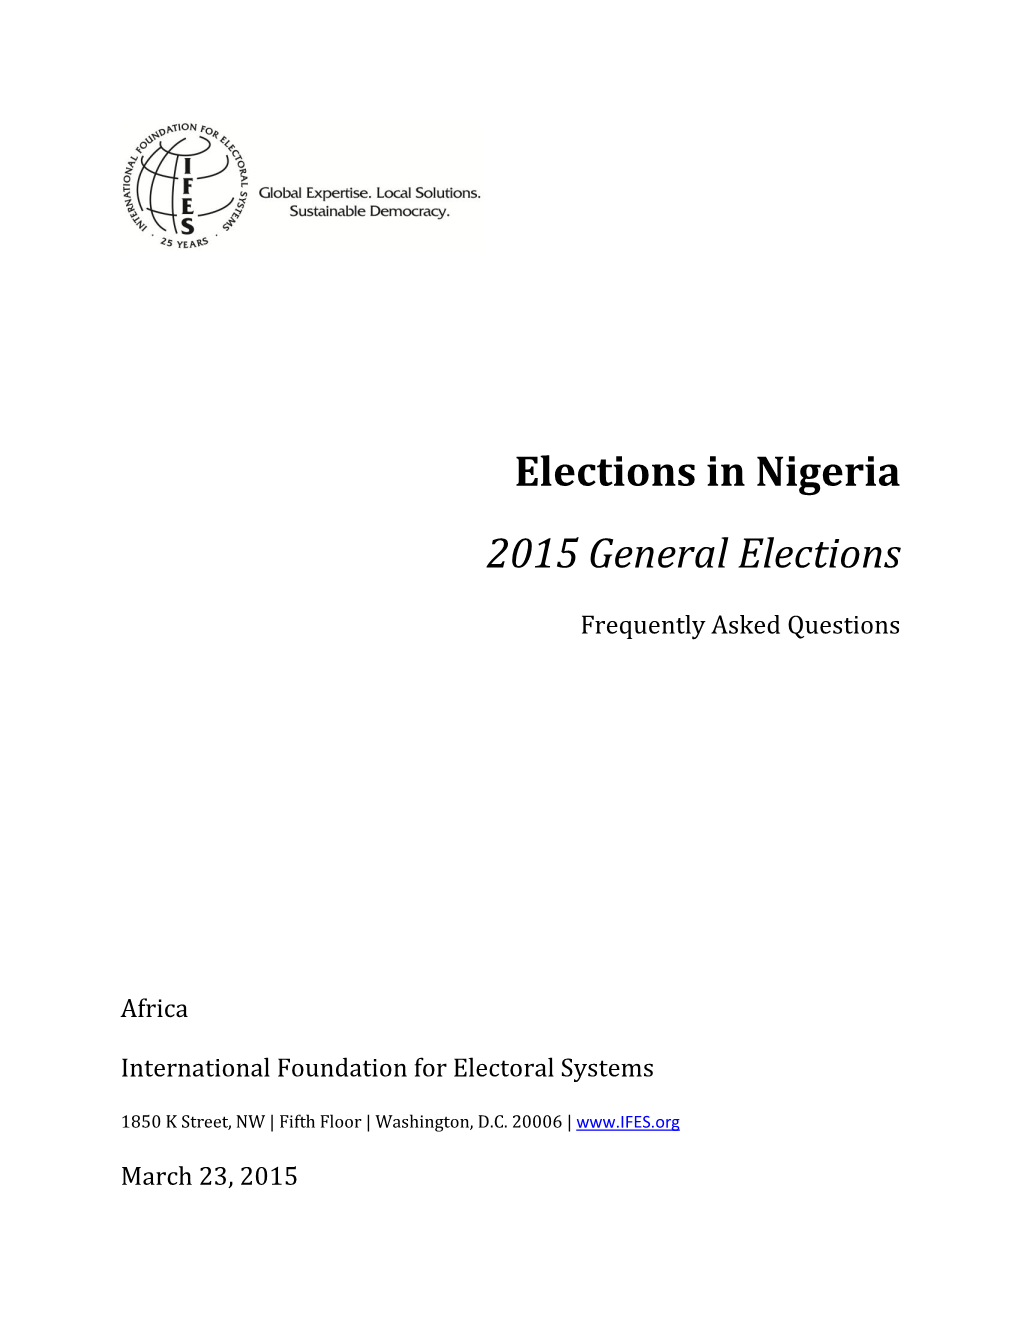 Elections in Nigeria 2015 General Elections